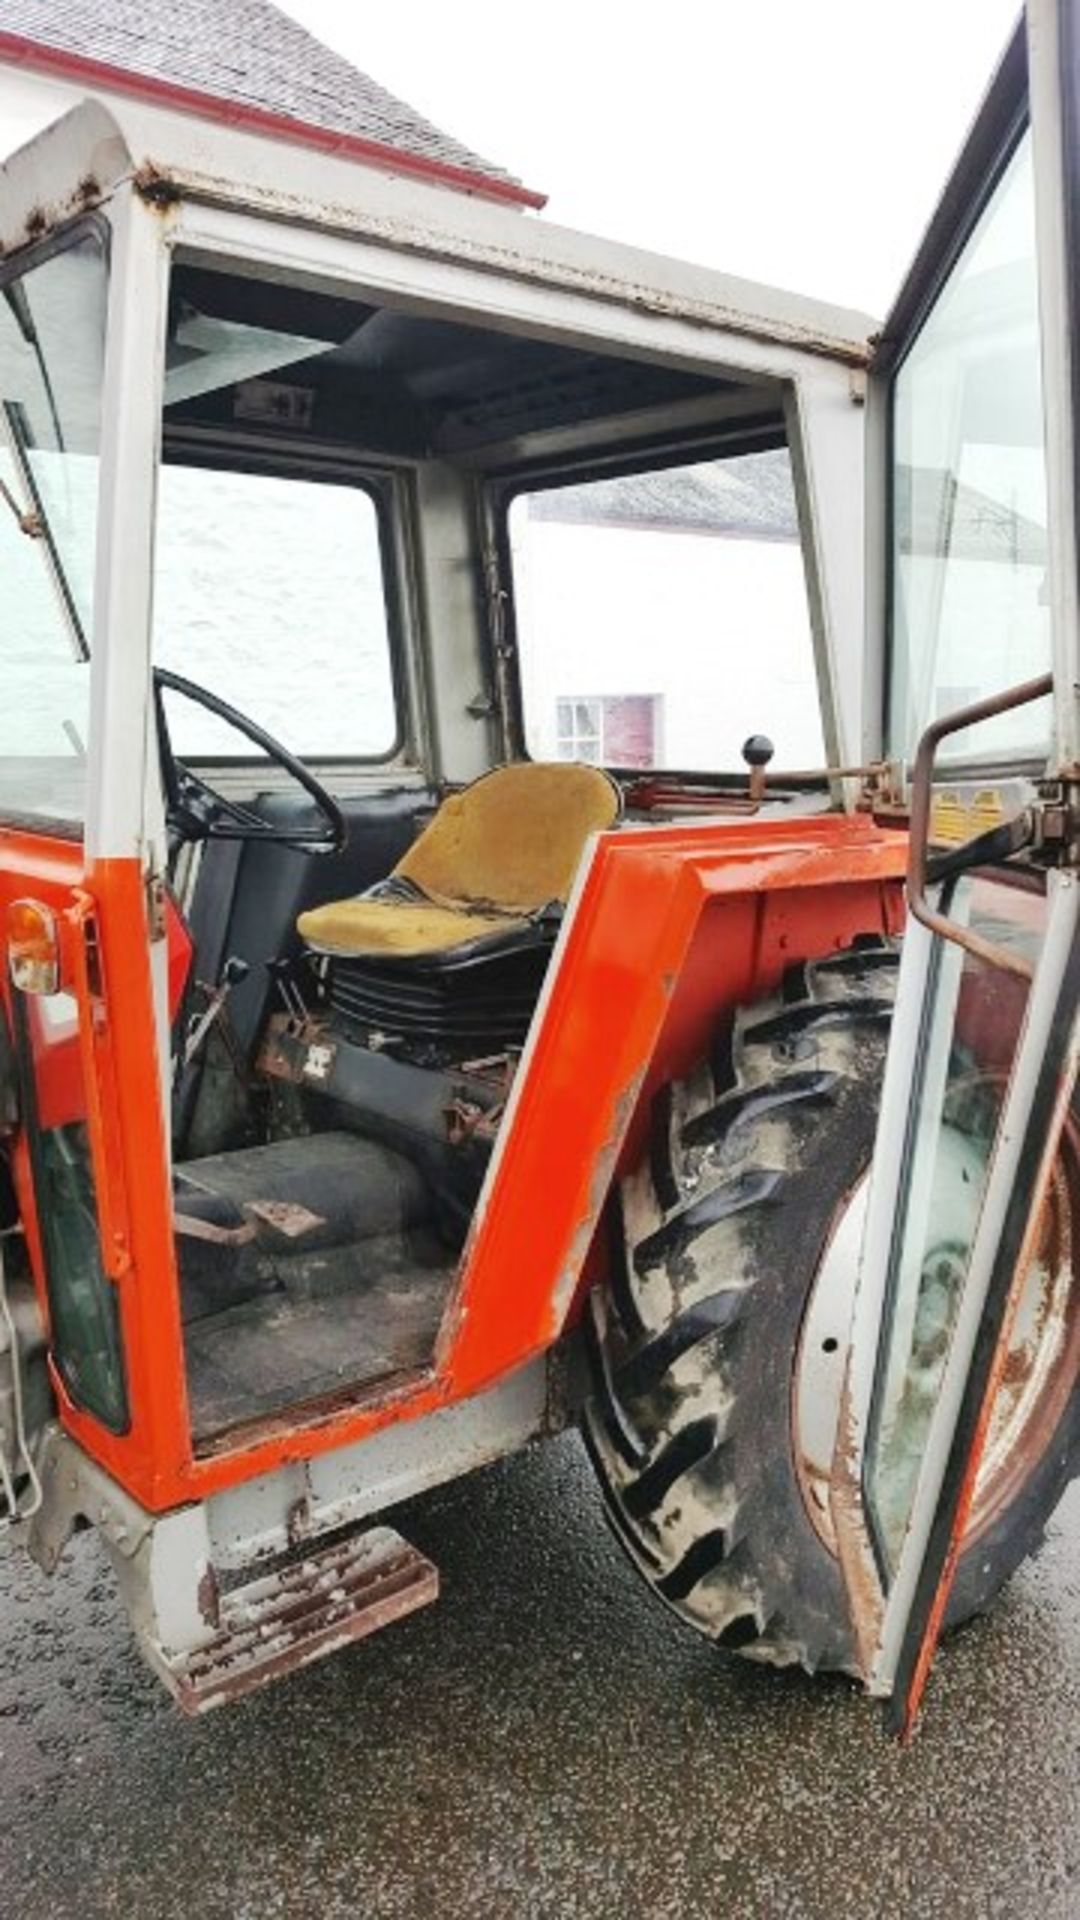 1979 MASSEY FERSUSON 550 tractor s/n 619197. Reg No OIA 804. 863hrs (not verifed) - Image 5 of 7